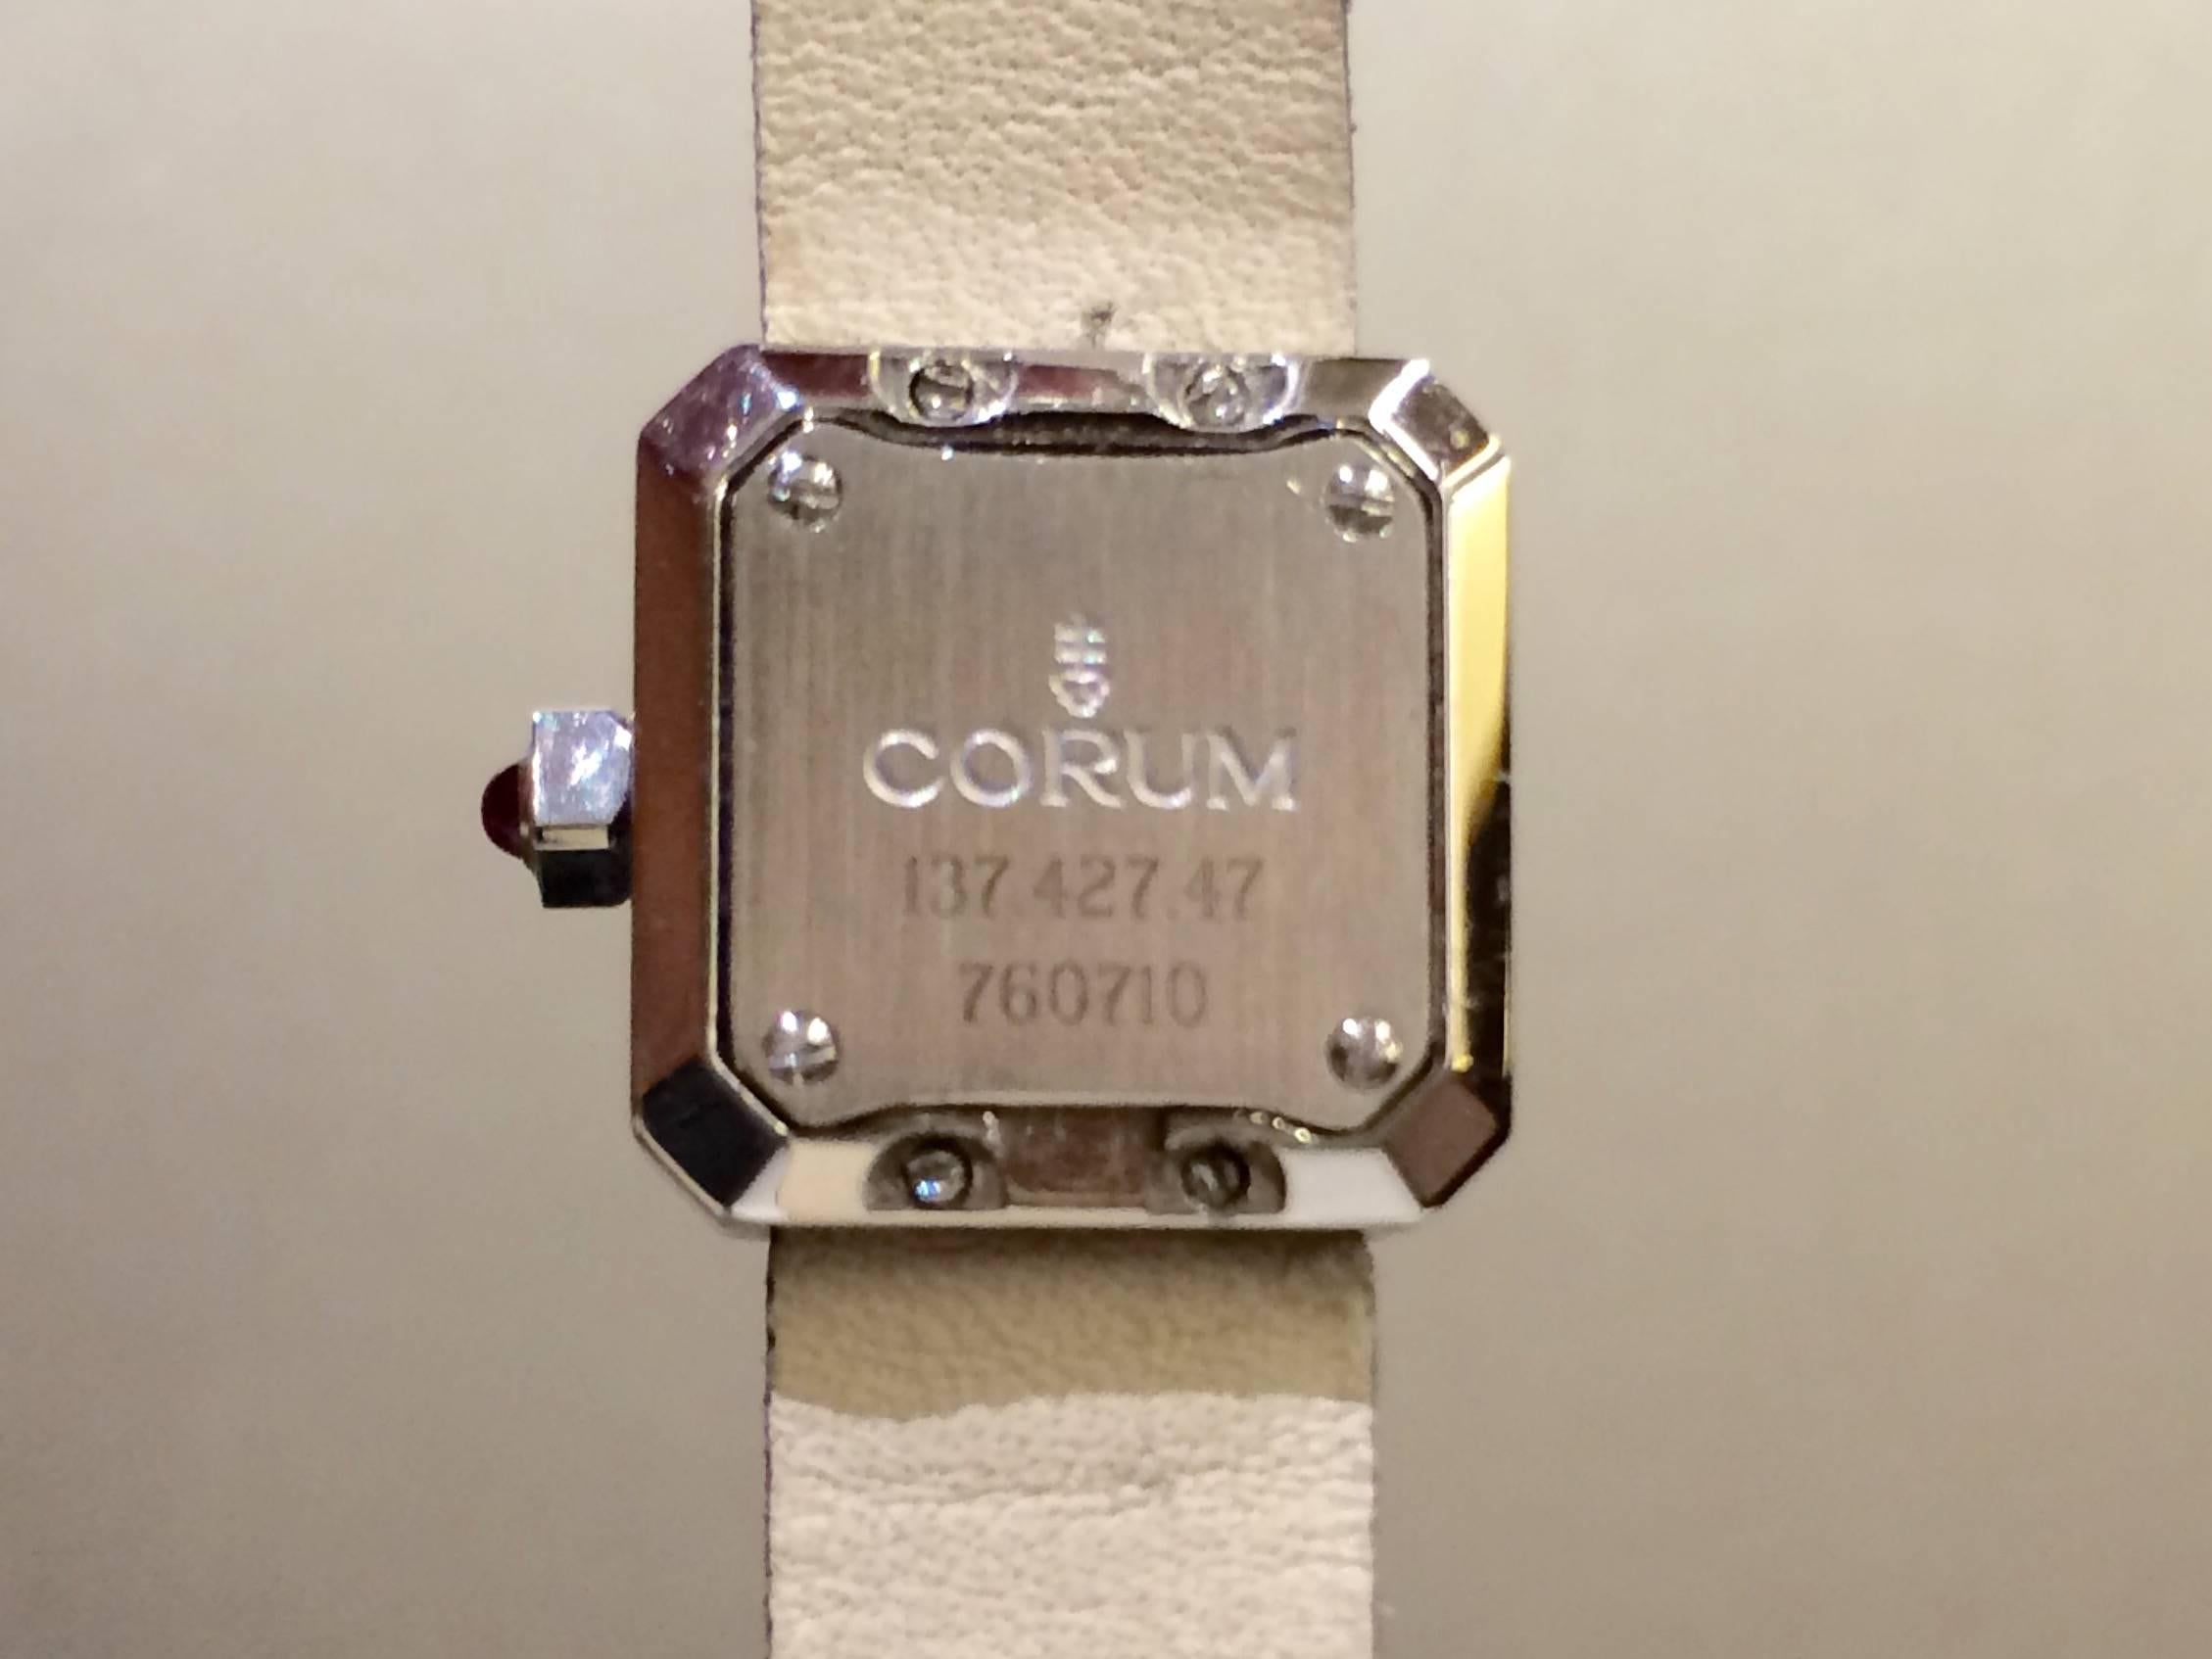 This petite ladies watch from Corum's Sugar Cube collection has just the right amount of sparkle to really make this piece stand out. The watch is made of stainless steel and has a bezel entirely set with diamonds. Features a pink dial which